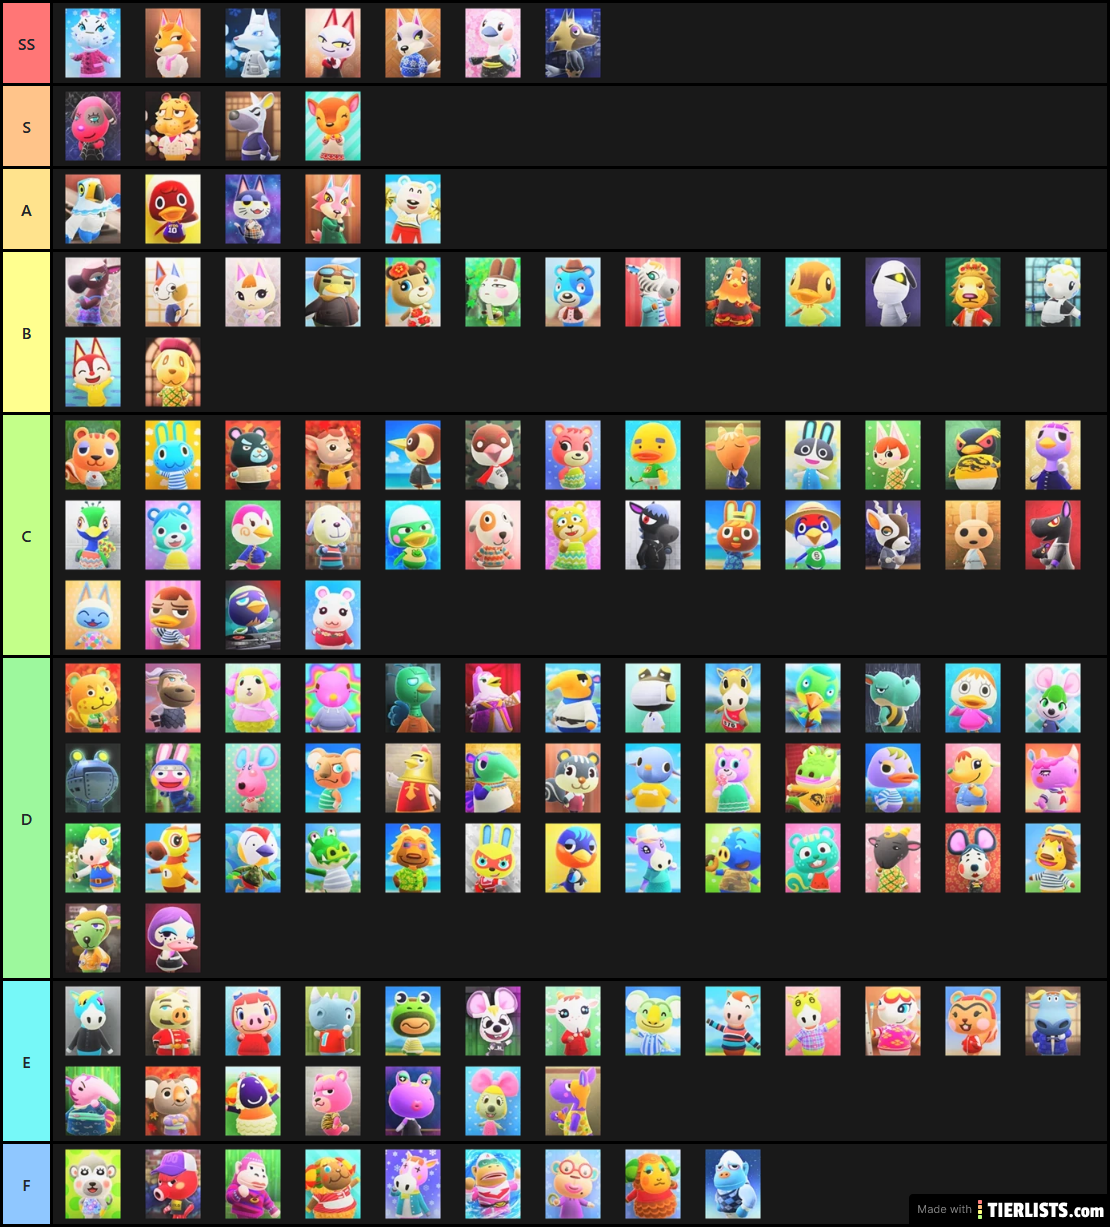 Acnh Villager List With Pictures Acnh Villager Tier List